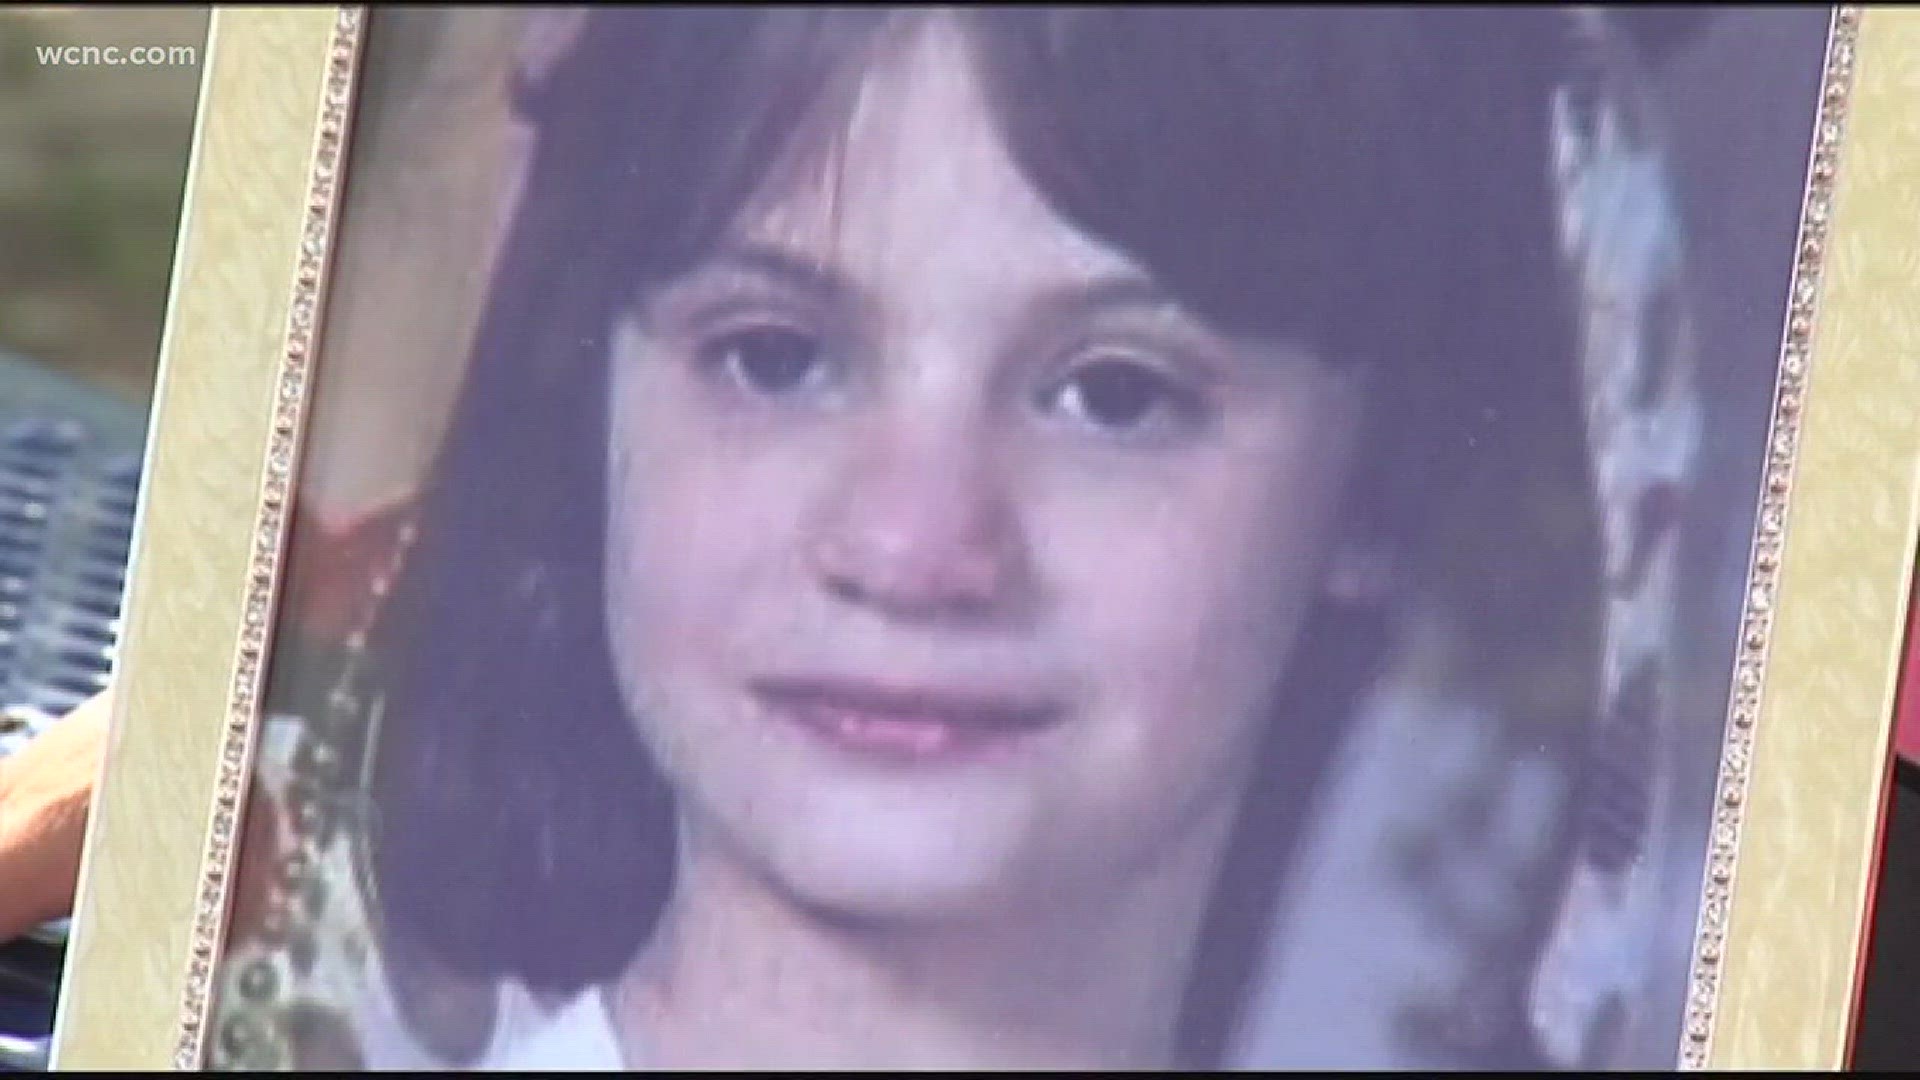 Murder charges likely, but will take time in Erica Parsons case